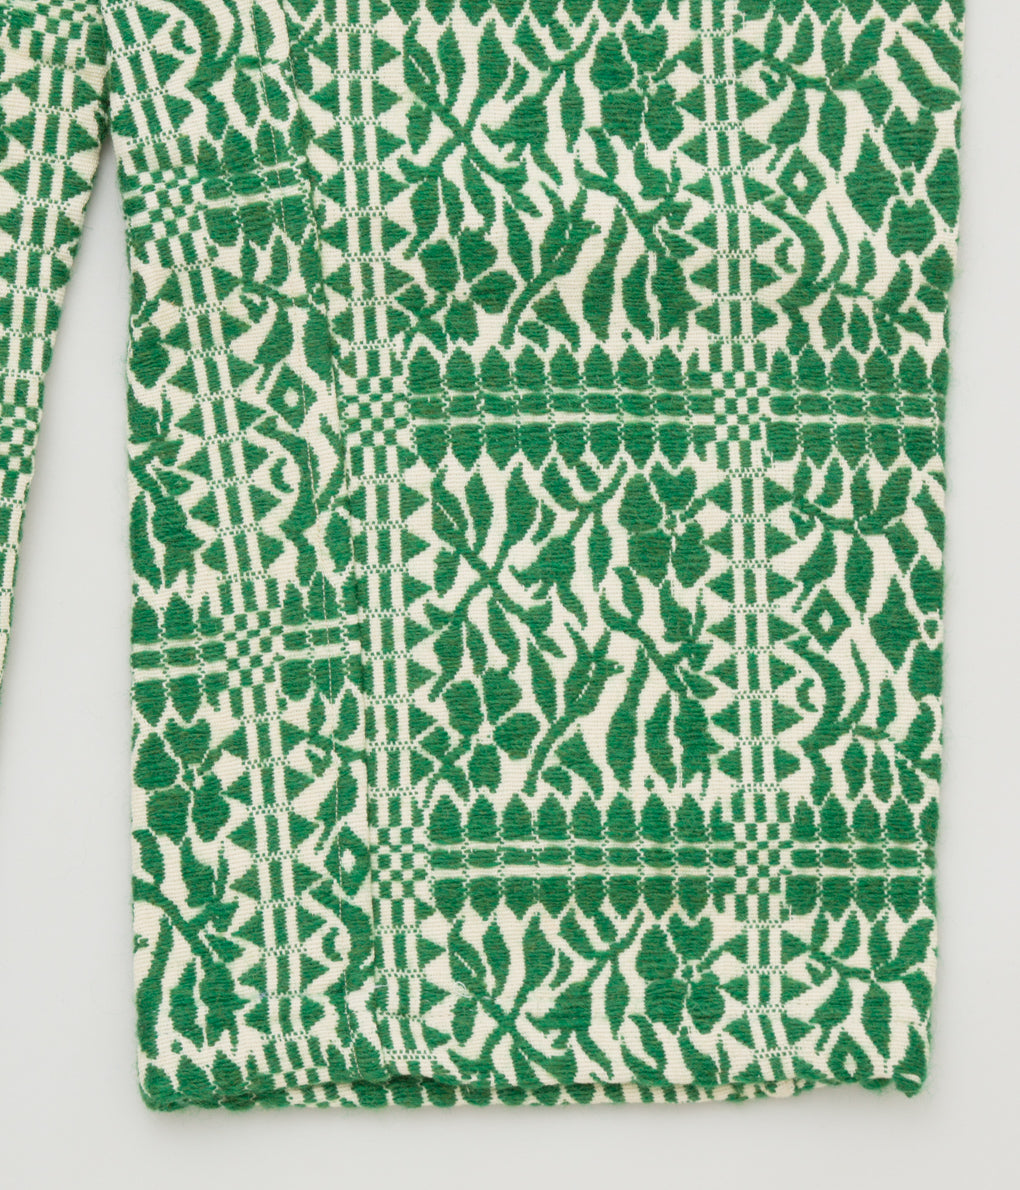 FAREWELL FRANCES "WOOL COVERLET CLAUDE PANTS" (GREEN)